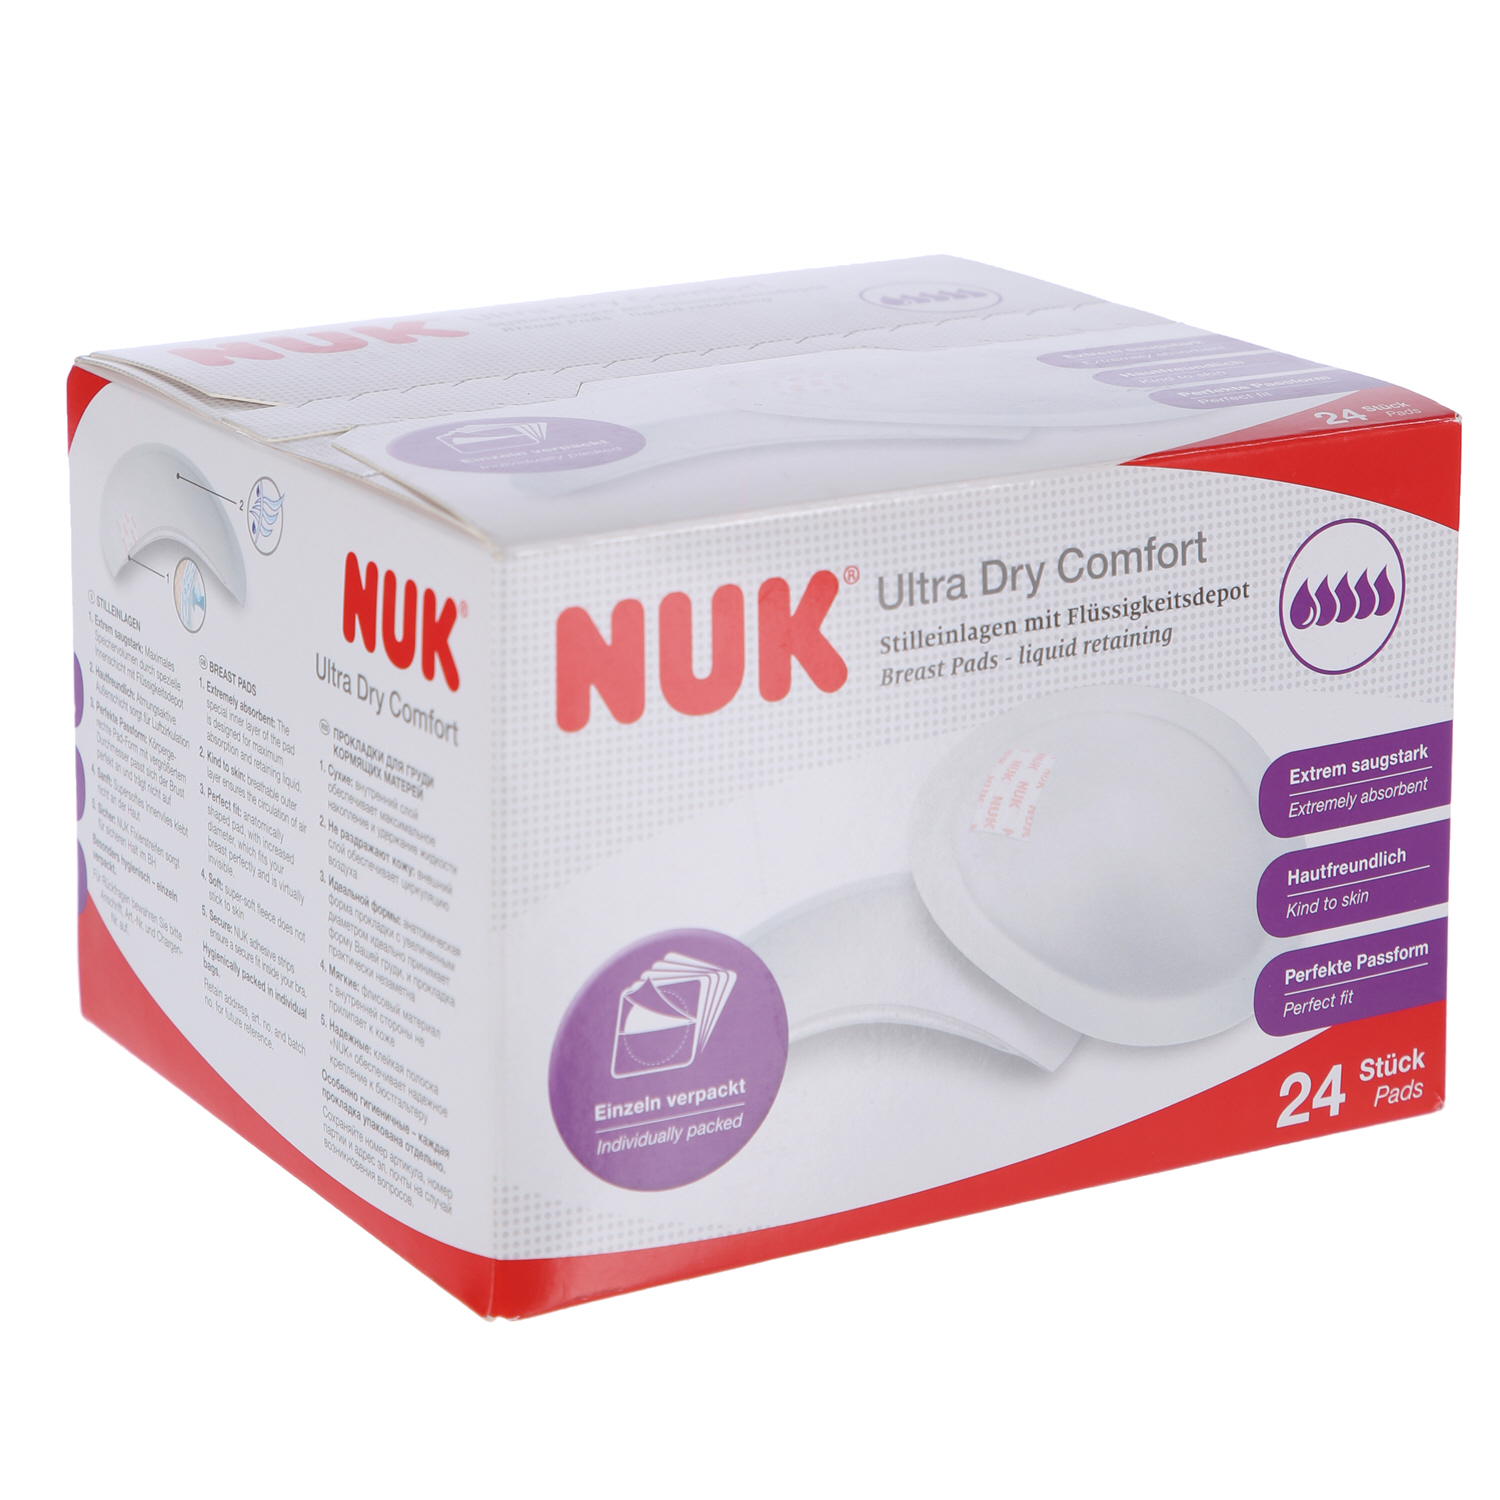 Nuk High Performance Disposable Breast Pads